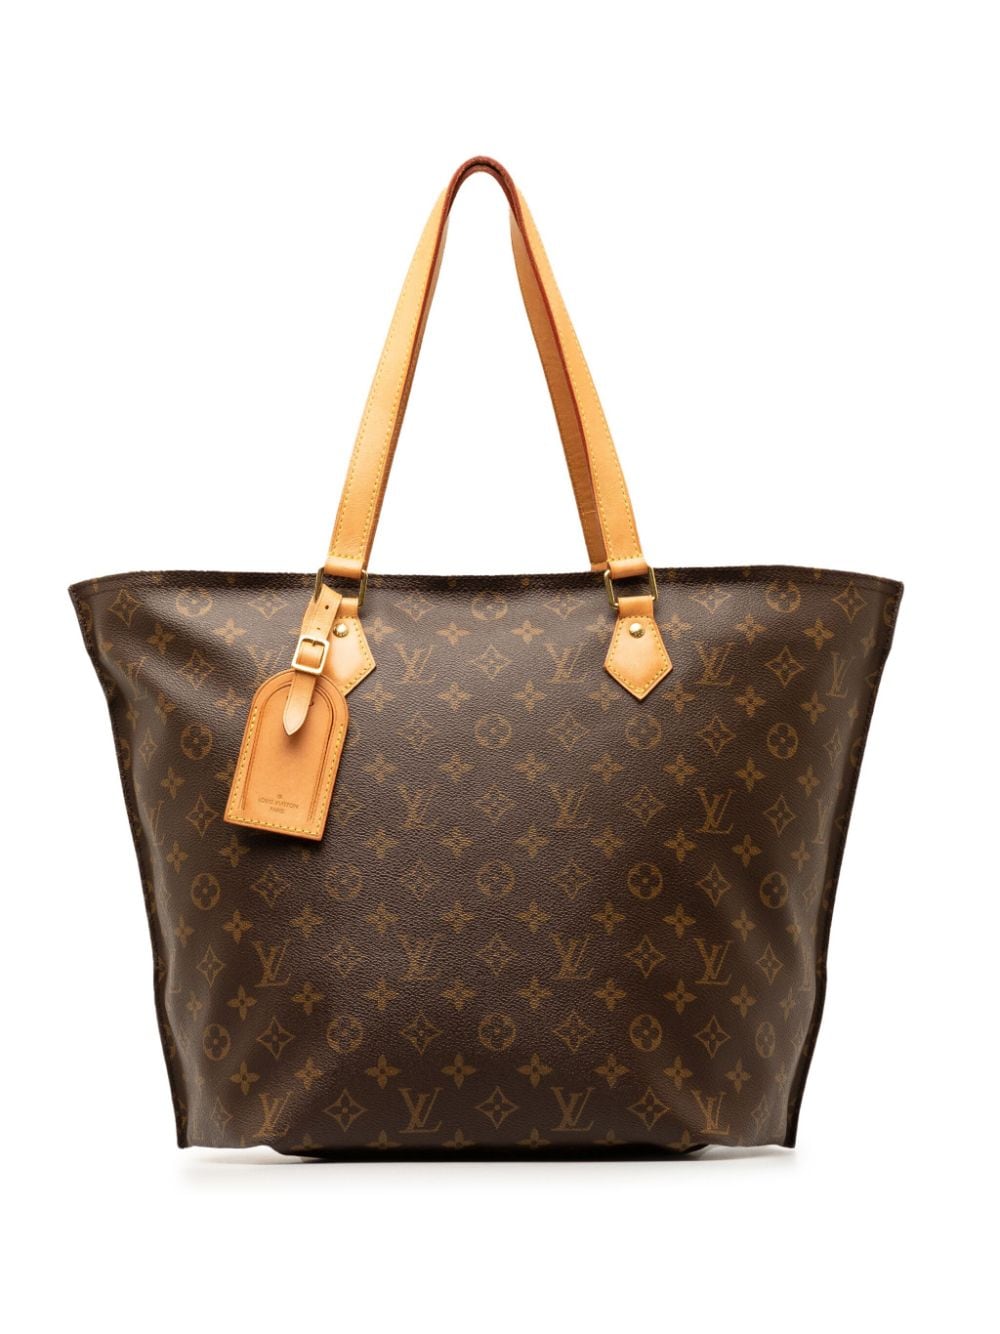 Pre-owned Louis Vuitton 2018 Monogram All-in Pm Tote Bag In Brown